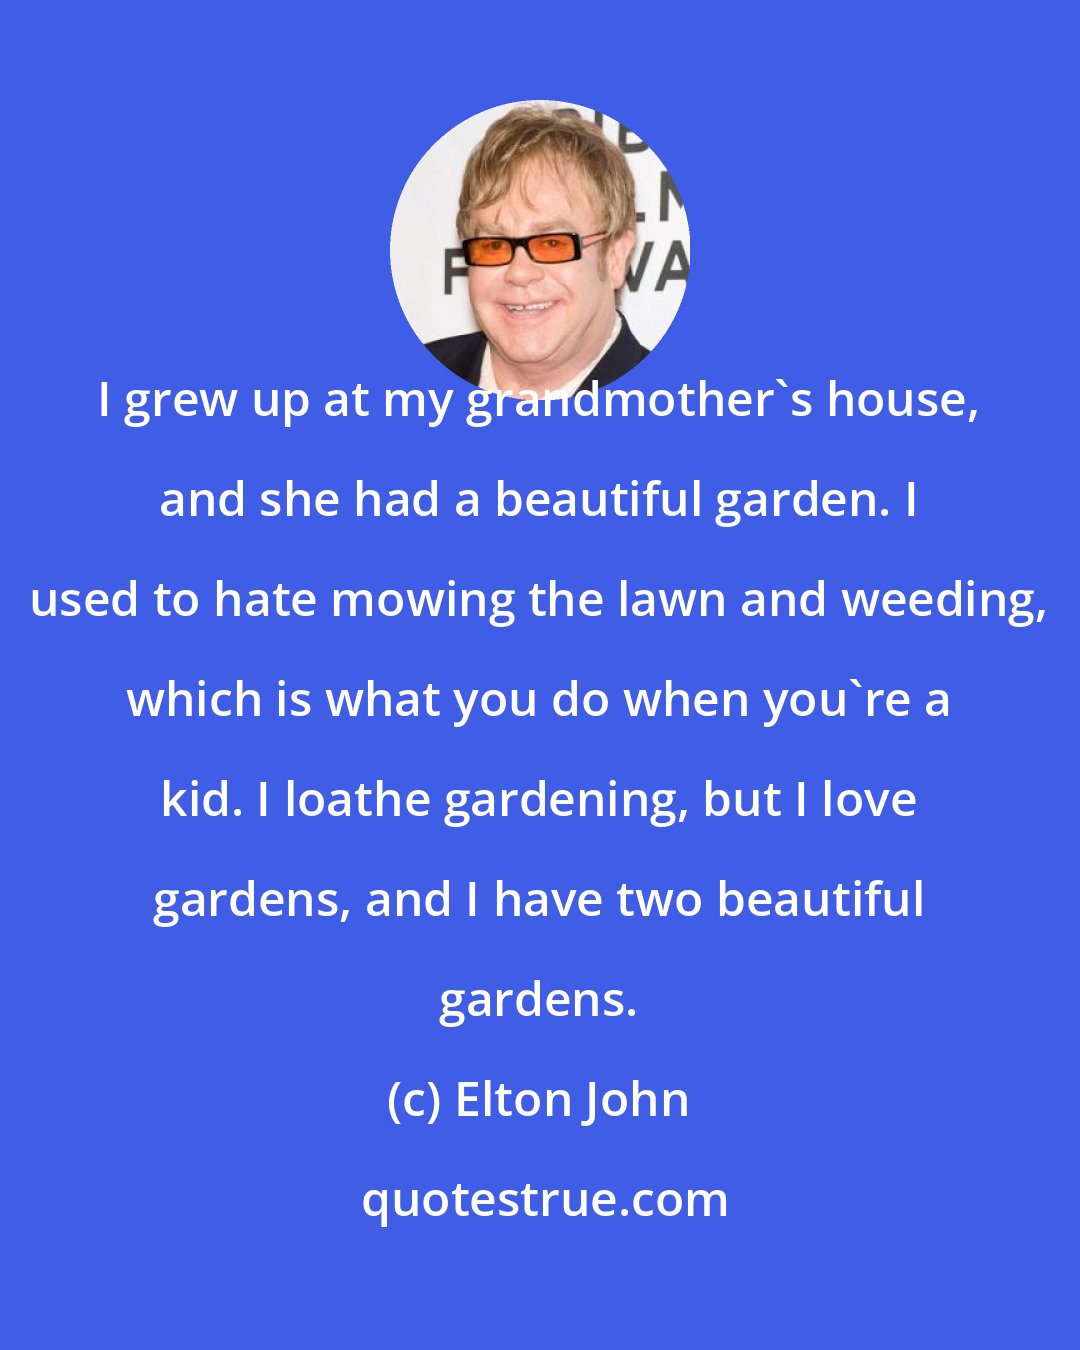 Elton John: I grew up at my grandmother's house, and she had a beautiful garden. I used to hate mowing the lawn and weeding, which is what you do when you're a kid. I loathe gardening, but I love gardens, and I have two beautiful gardens.